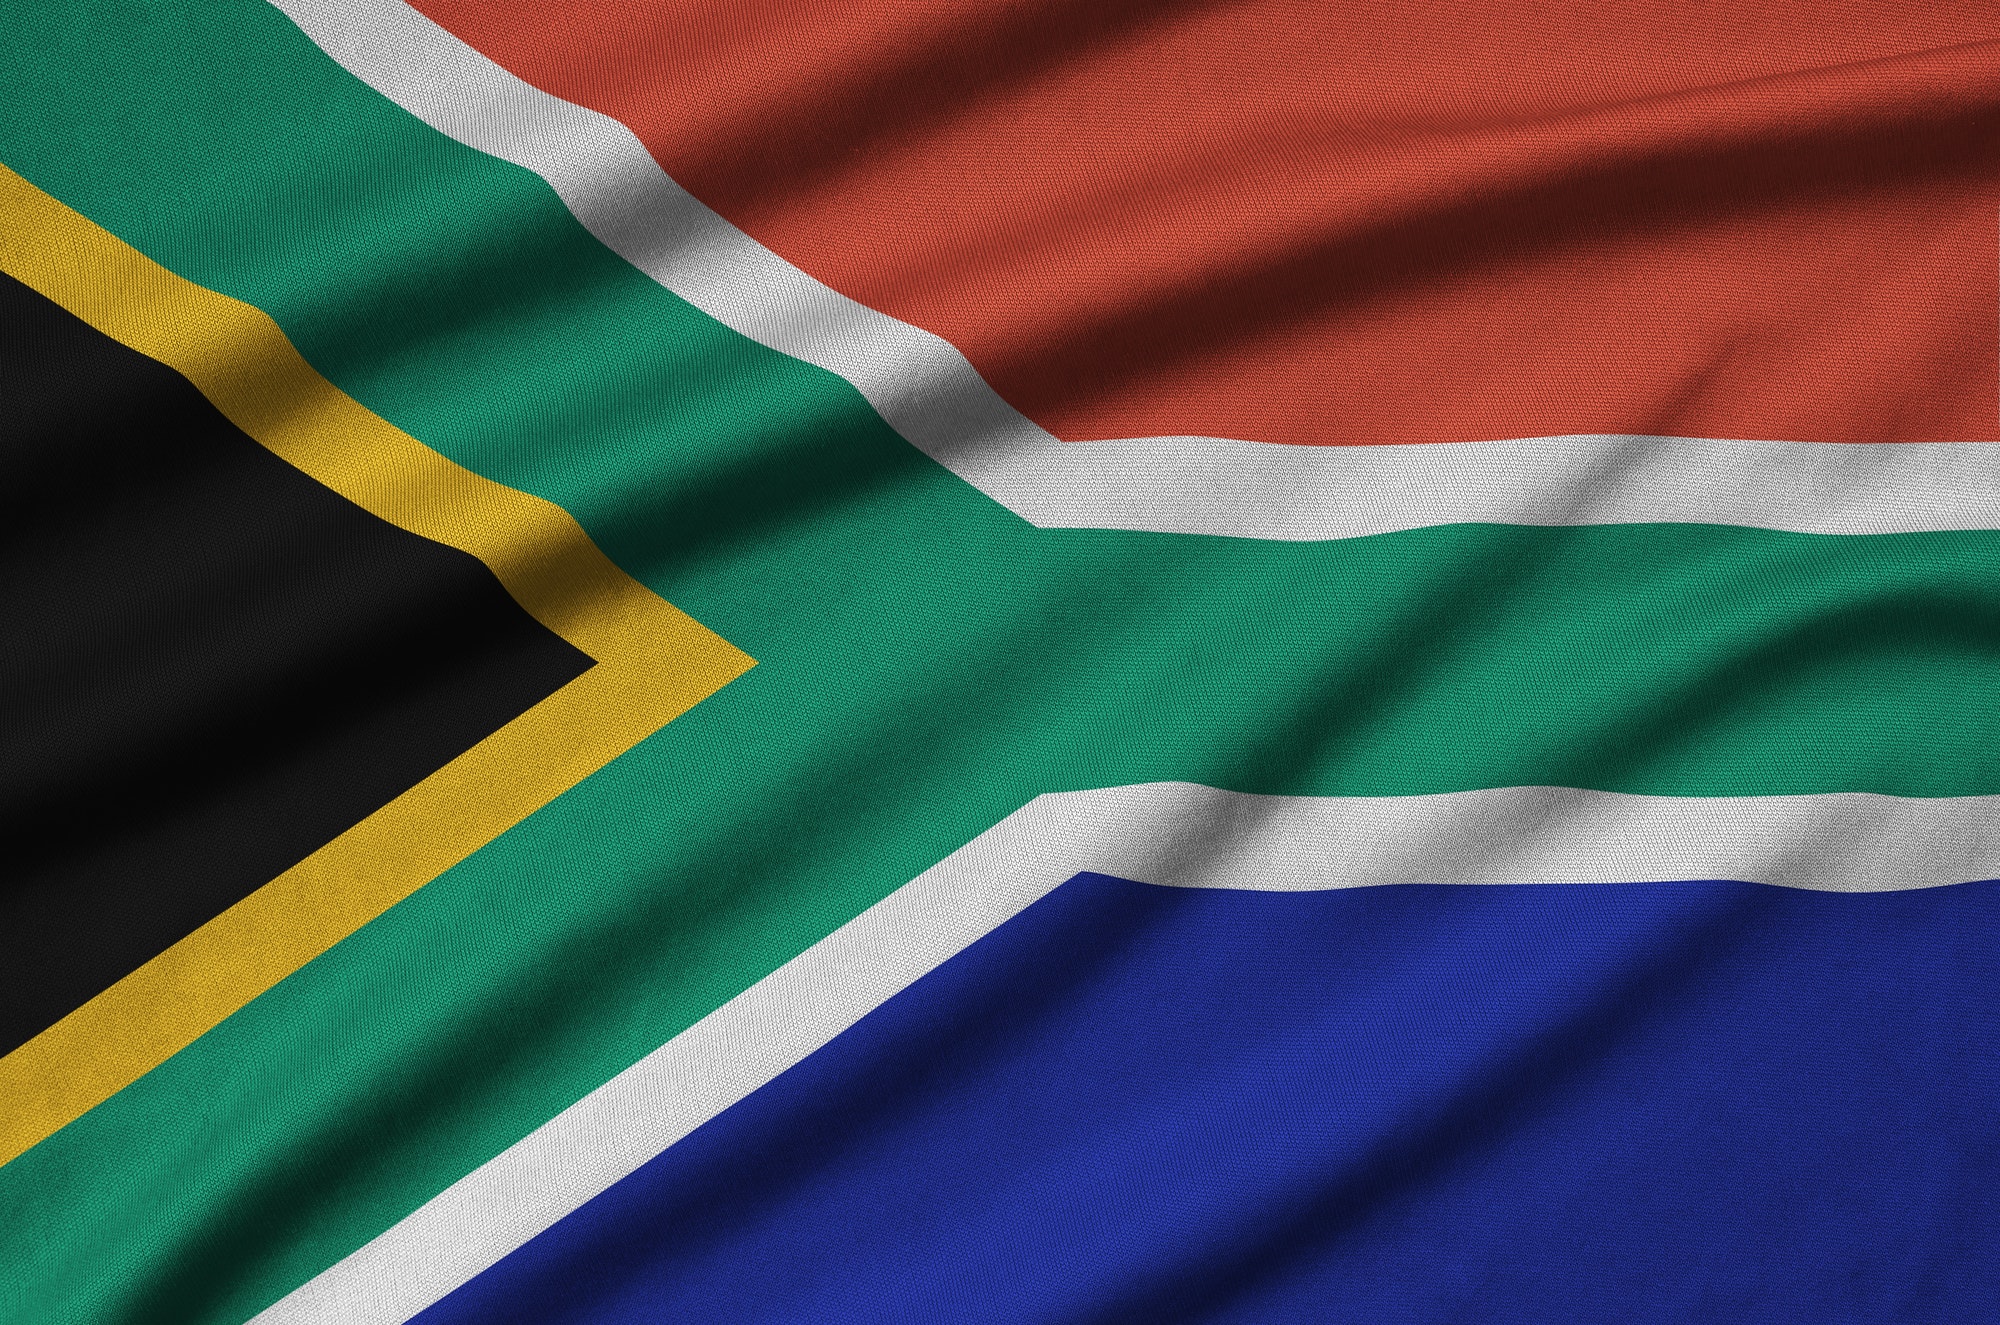 South Africa flag is depicted on a sports cloth fabric with many folds. Sport team waving banner